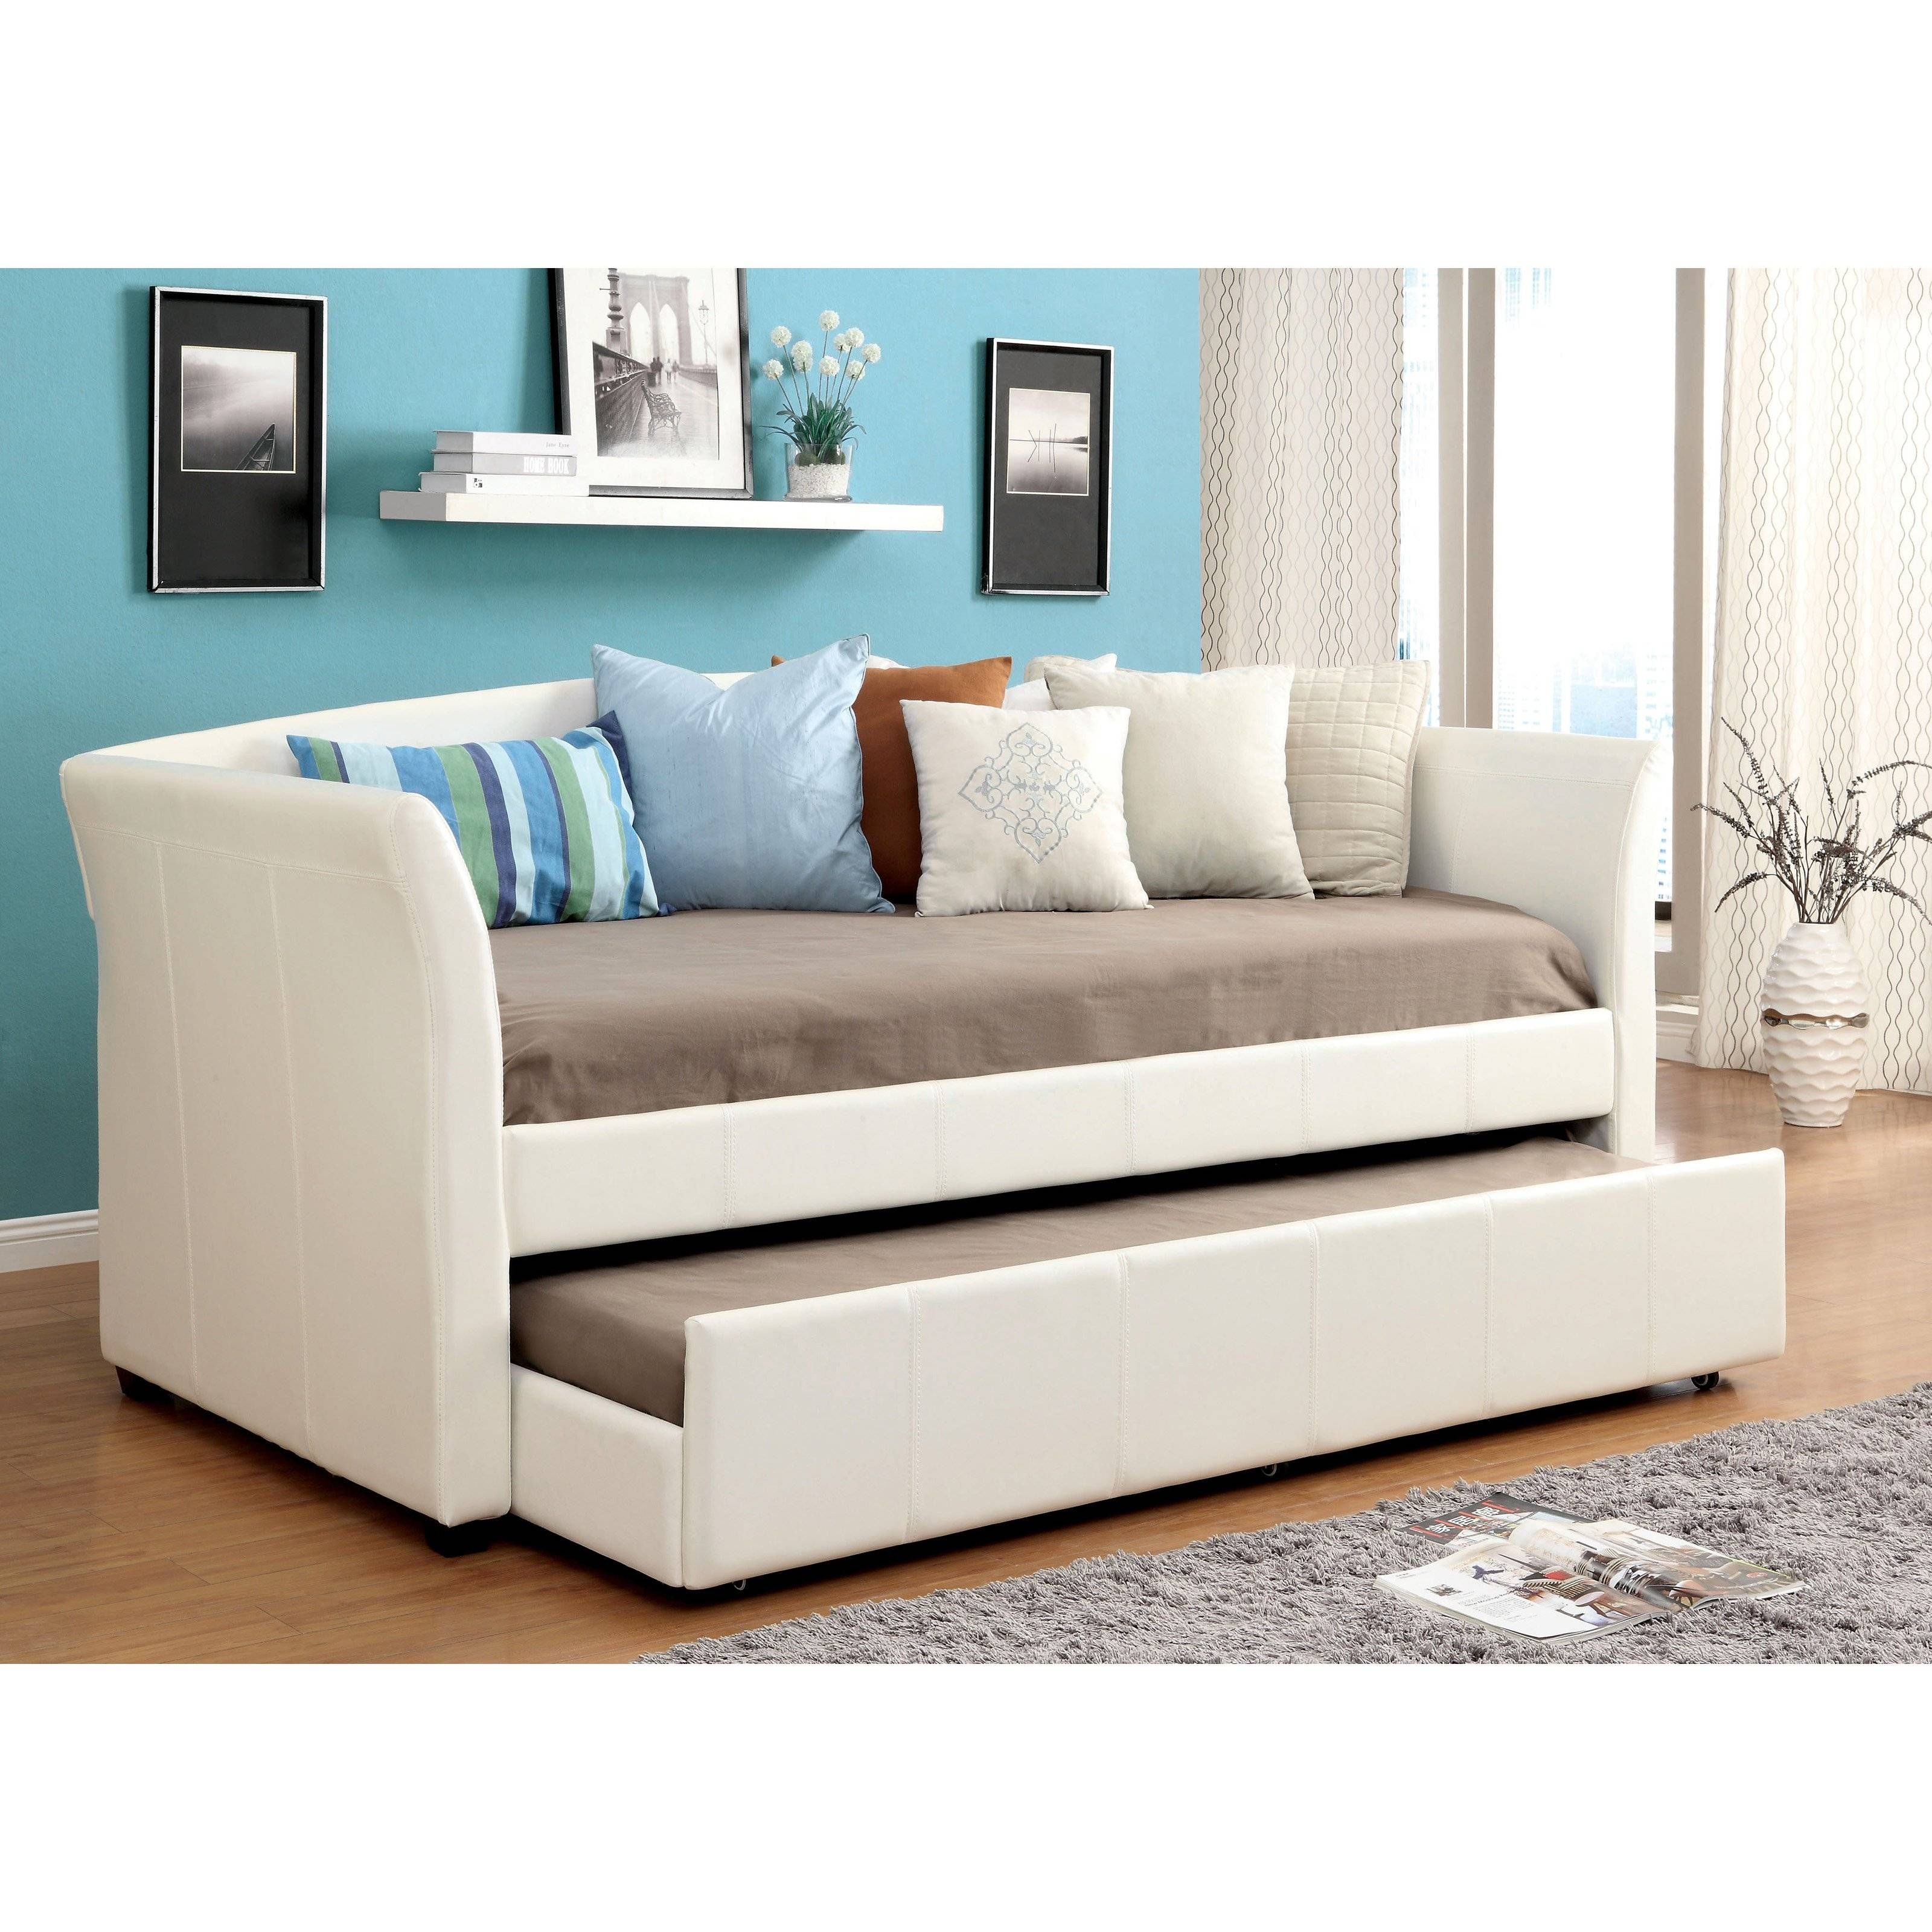 Furniture Of America Roby Leatherette Daybed With Trundle | Hayneedle Intended For Sofas Daybed With Trundle (View 15 of 15)